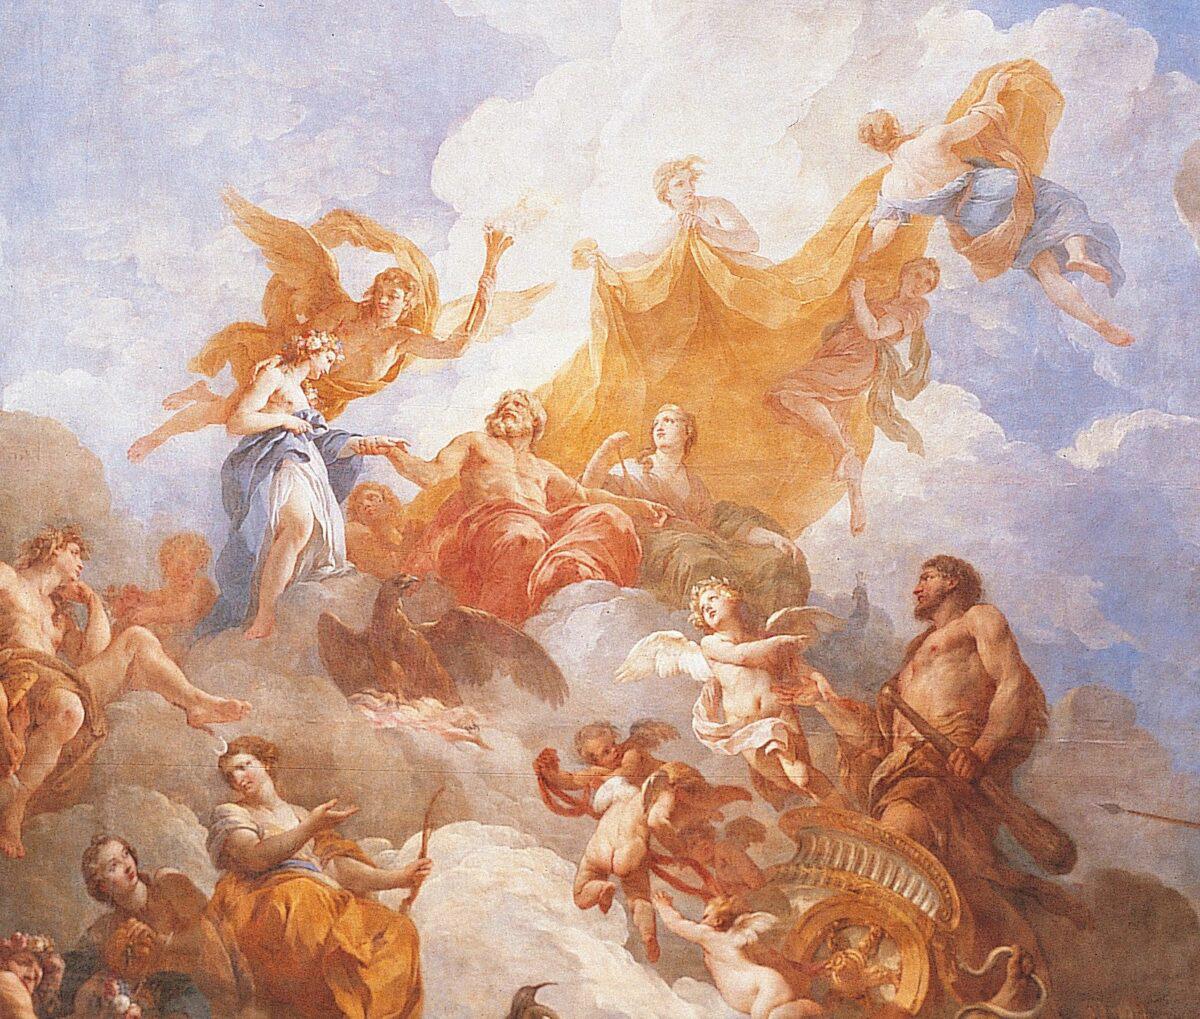 The angel named Love of Virtue shows Hercules to his father Jupiter (in muted scarlet). Jupiter presents to his son Hebe, goddess of Youth (in blue), led by the winged goddess Hymen. (Public Domain)